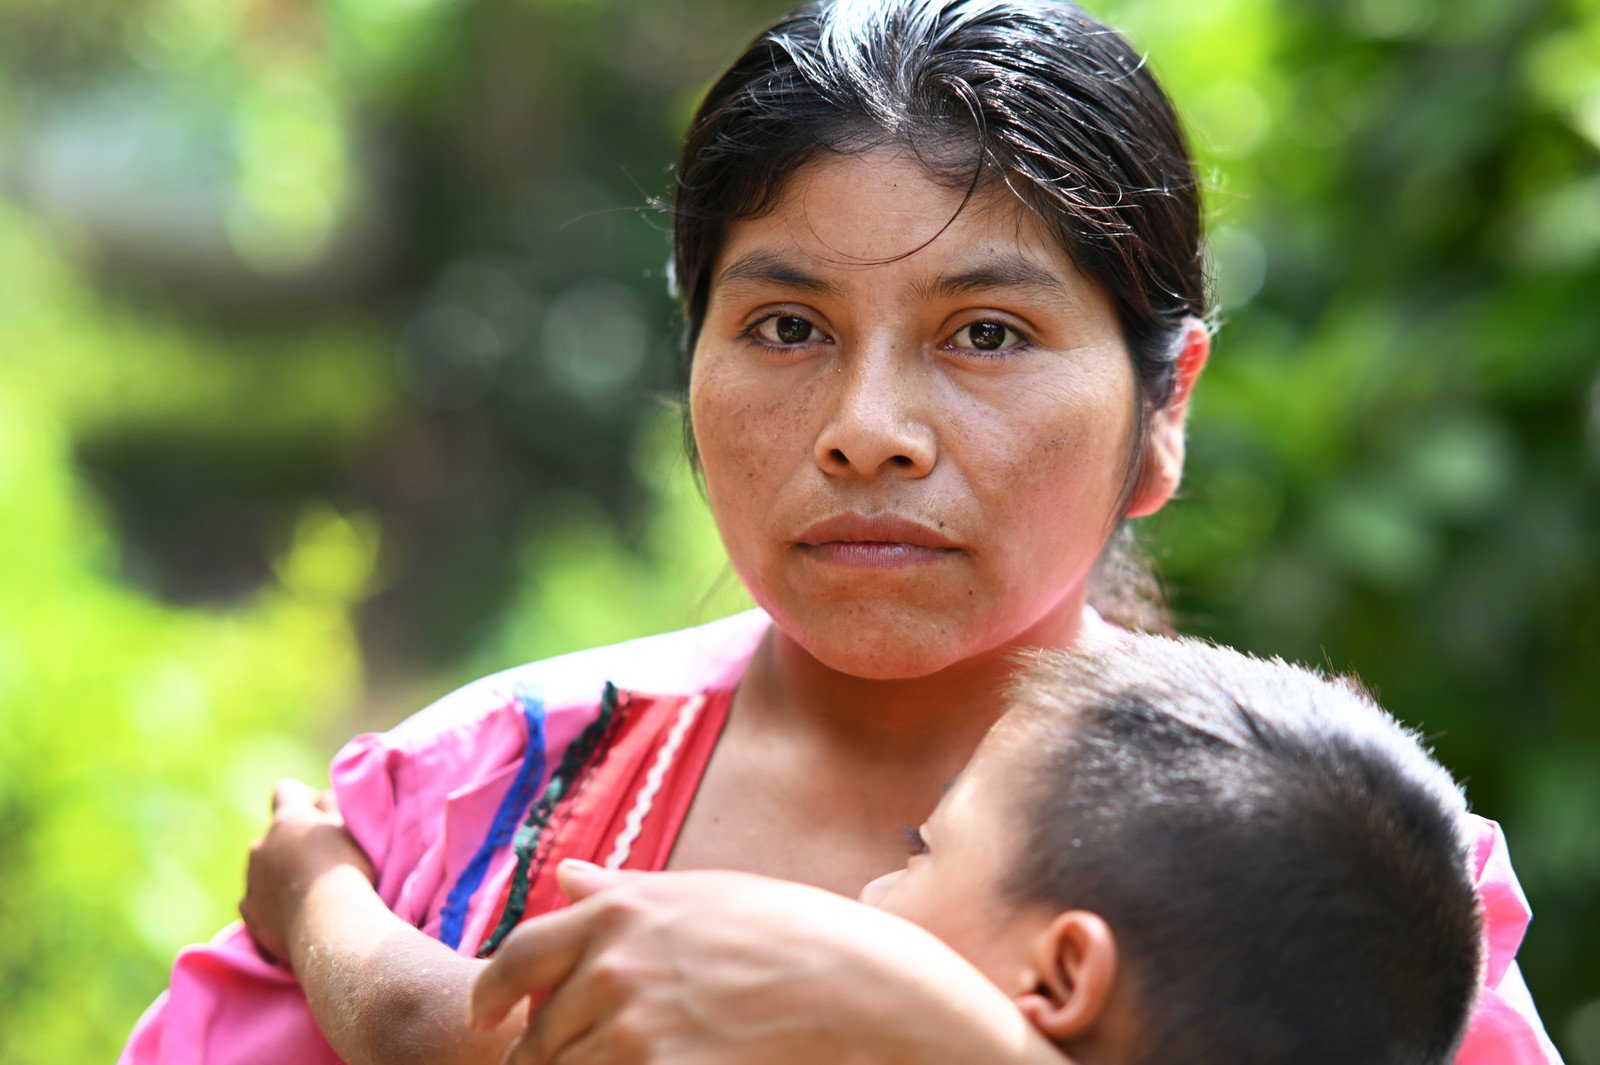 ‘We spent almost eight days enduring starvation’, Mariana said. In the community of Naranjo in Guatemala, climate change is leaving people with nothing to eat. With no other option, Mariana’s husband and her 20-year-old son walked for 20 days towards the United States in search of work. They had to sell their land and take on debt to pay for the journey. When her husband sends money back, some of it is used to pay off the debt and the rest goes towards the family’s survival. (Photo: Valerie Caamaño / Oxfam)